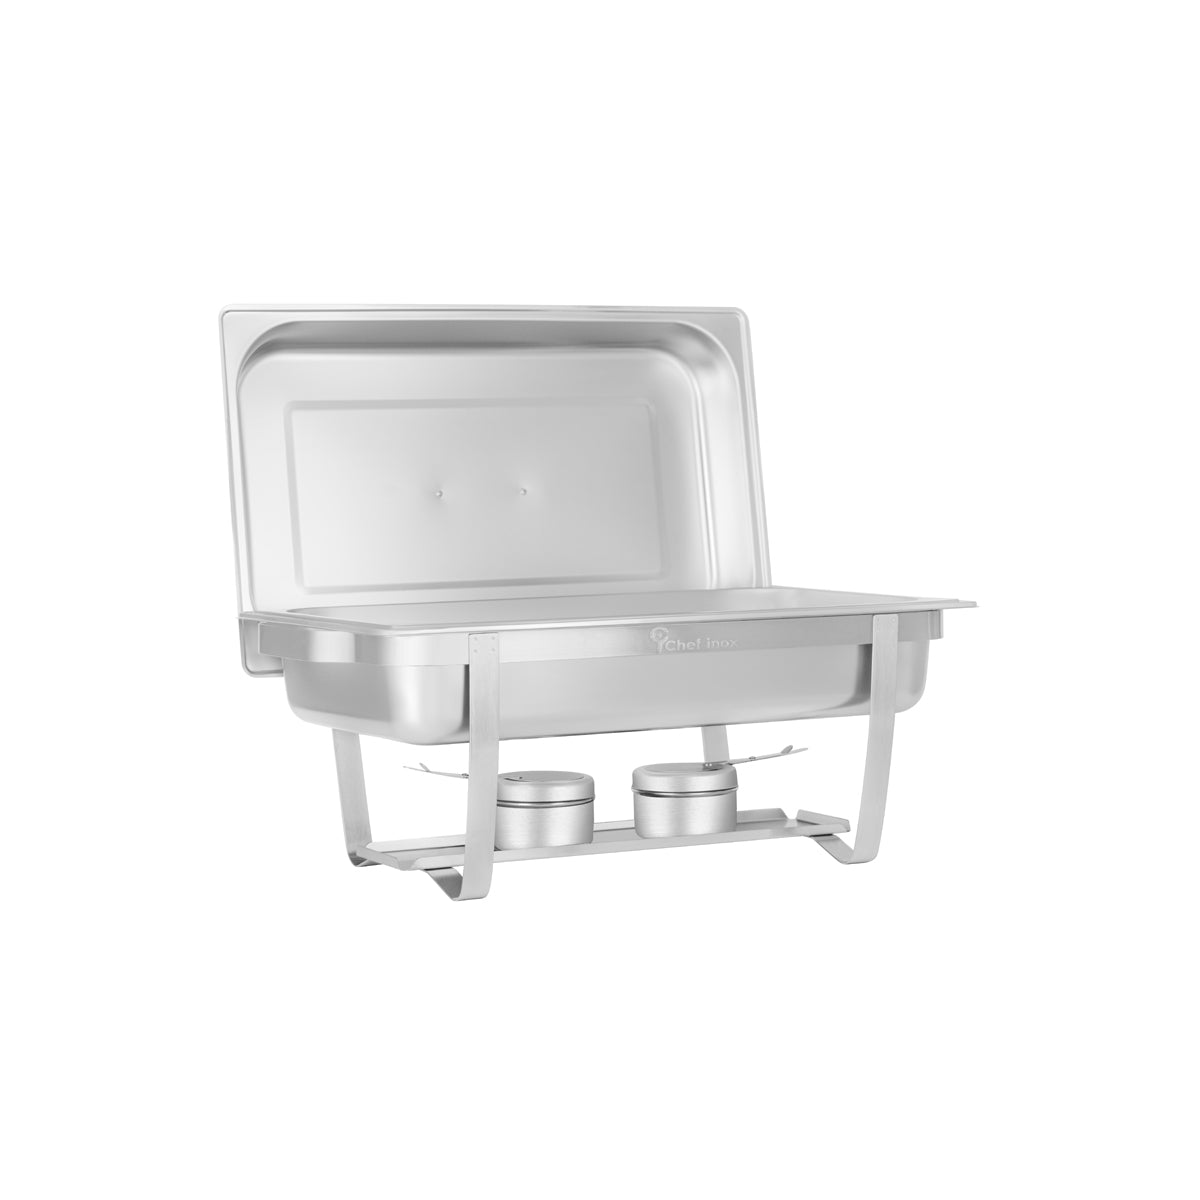 54800 Chef Inox Chafer Deluxe Economy Stackable Stainless Steel 1/1 Size Tomkin Australia Hospitality Supplies